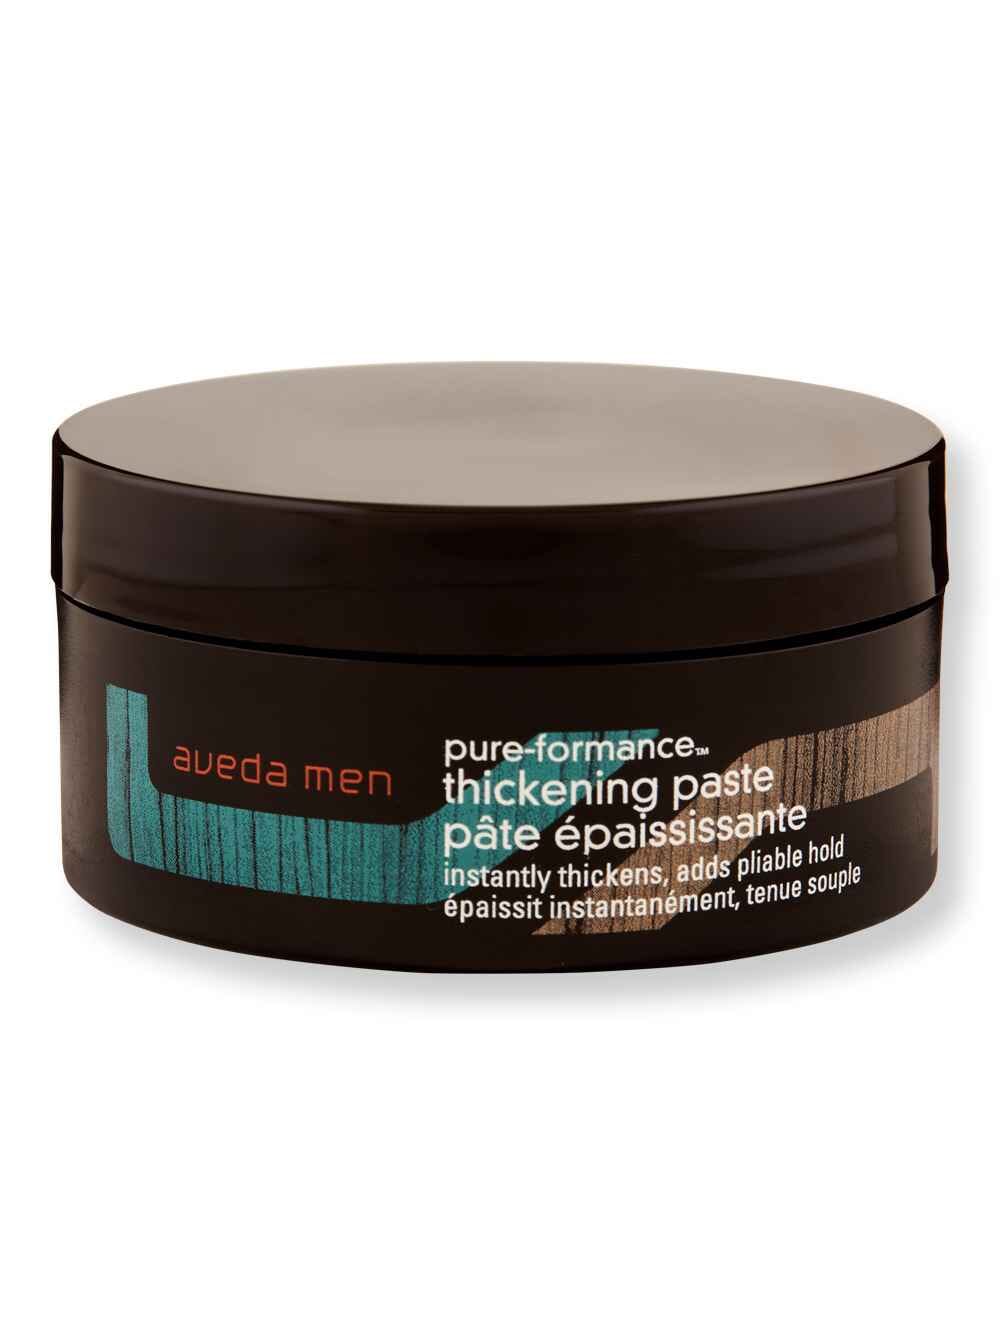 Aveda Aveda Men Pure-Formance Thickening Paste 75 ml Styling Treatments 